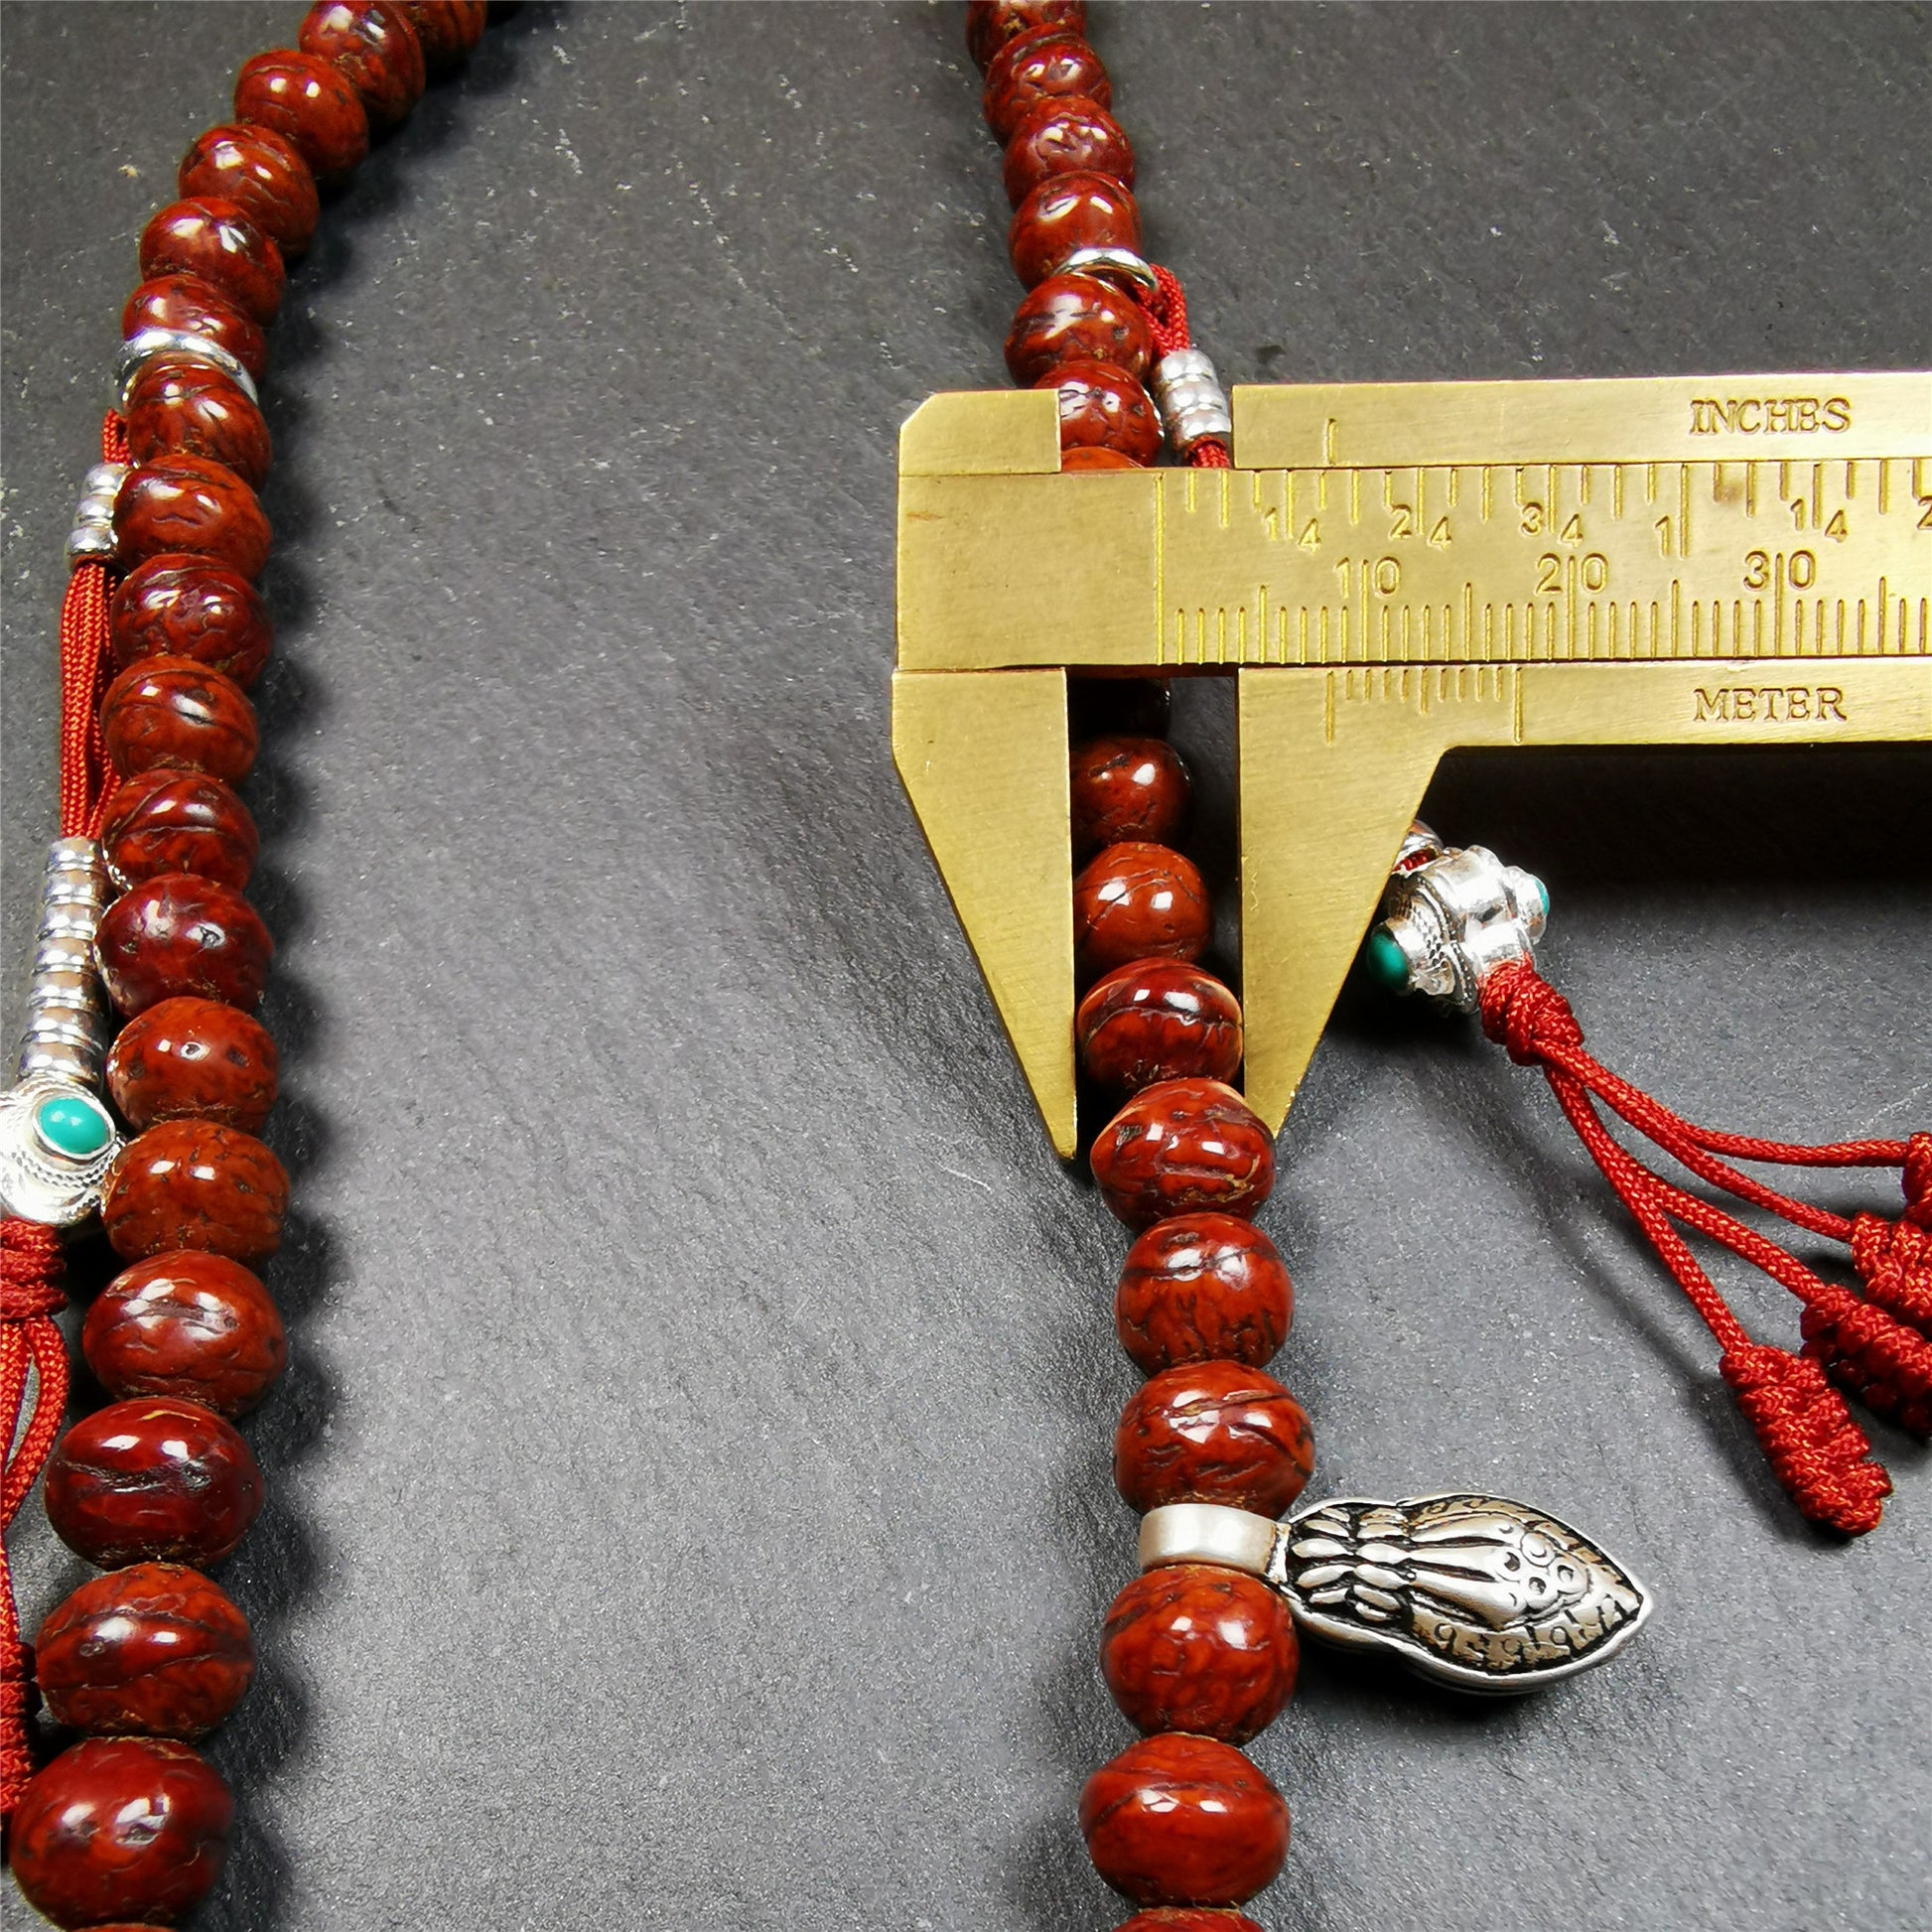 This bodhi beads mala is made by Tibetan craftsmen and come from Hepo Town, Baiyu County, the birthplace of the famous Tibetan handicrafts,about 30 years old, hold and blessed by a lama in Baiyu Monastery. It is composed of 108 bodhi seed beads, and is equipped with 3 agate beads, silver bead counters are installed on both sides, 1 mani jewel bead clip,and finally consists a bone guru bead and vajra on the end, very elegant.